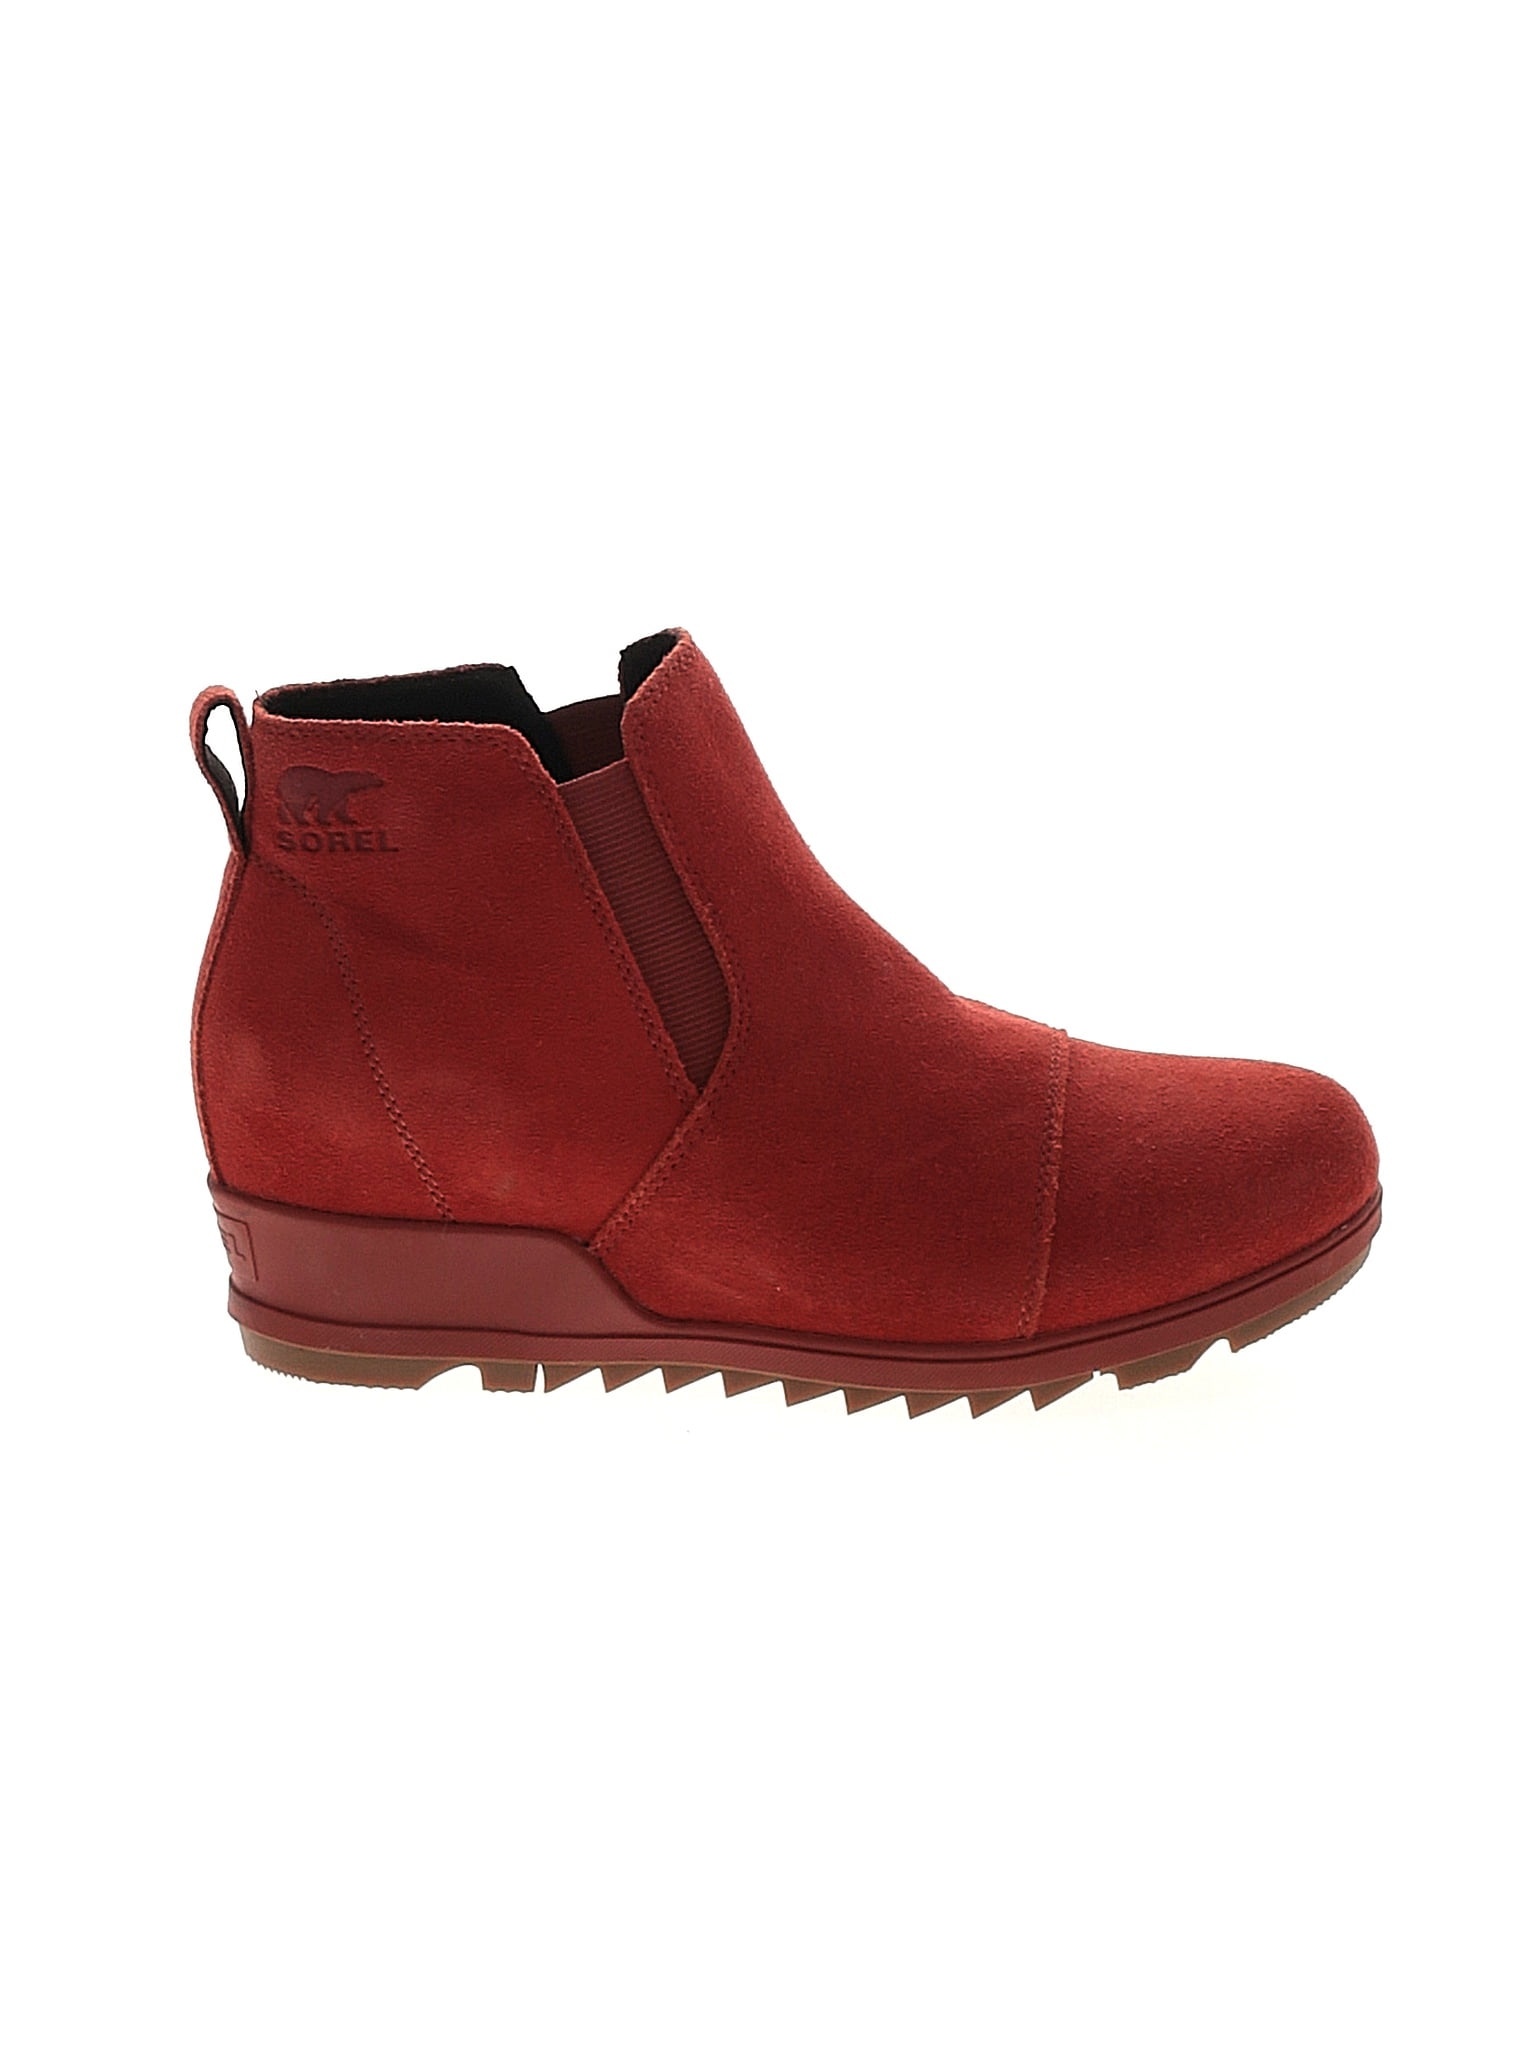 Sorel Solid Maroon Red Ankle Boots Size 9 - 59% off | thredUP